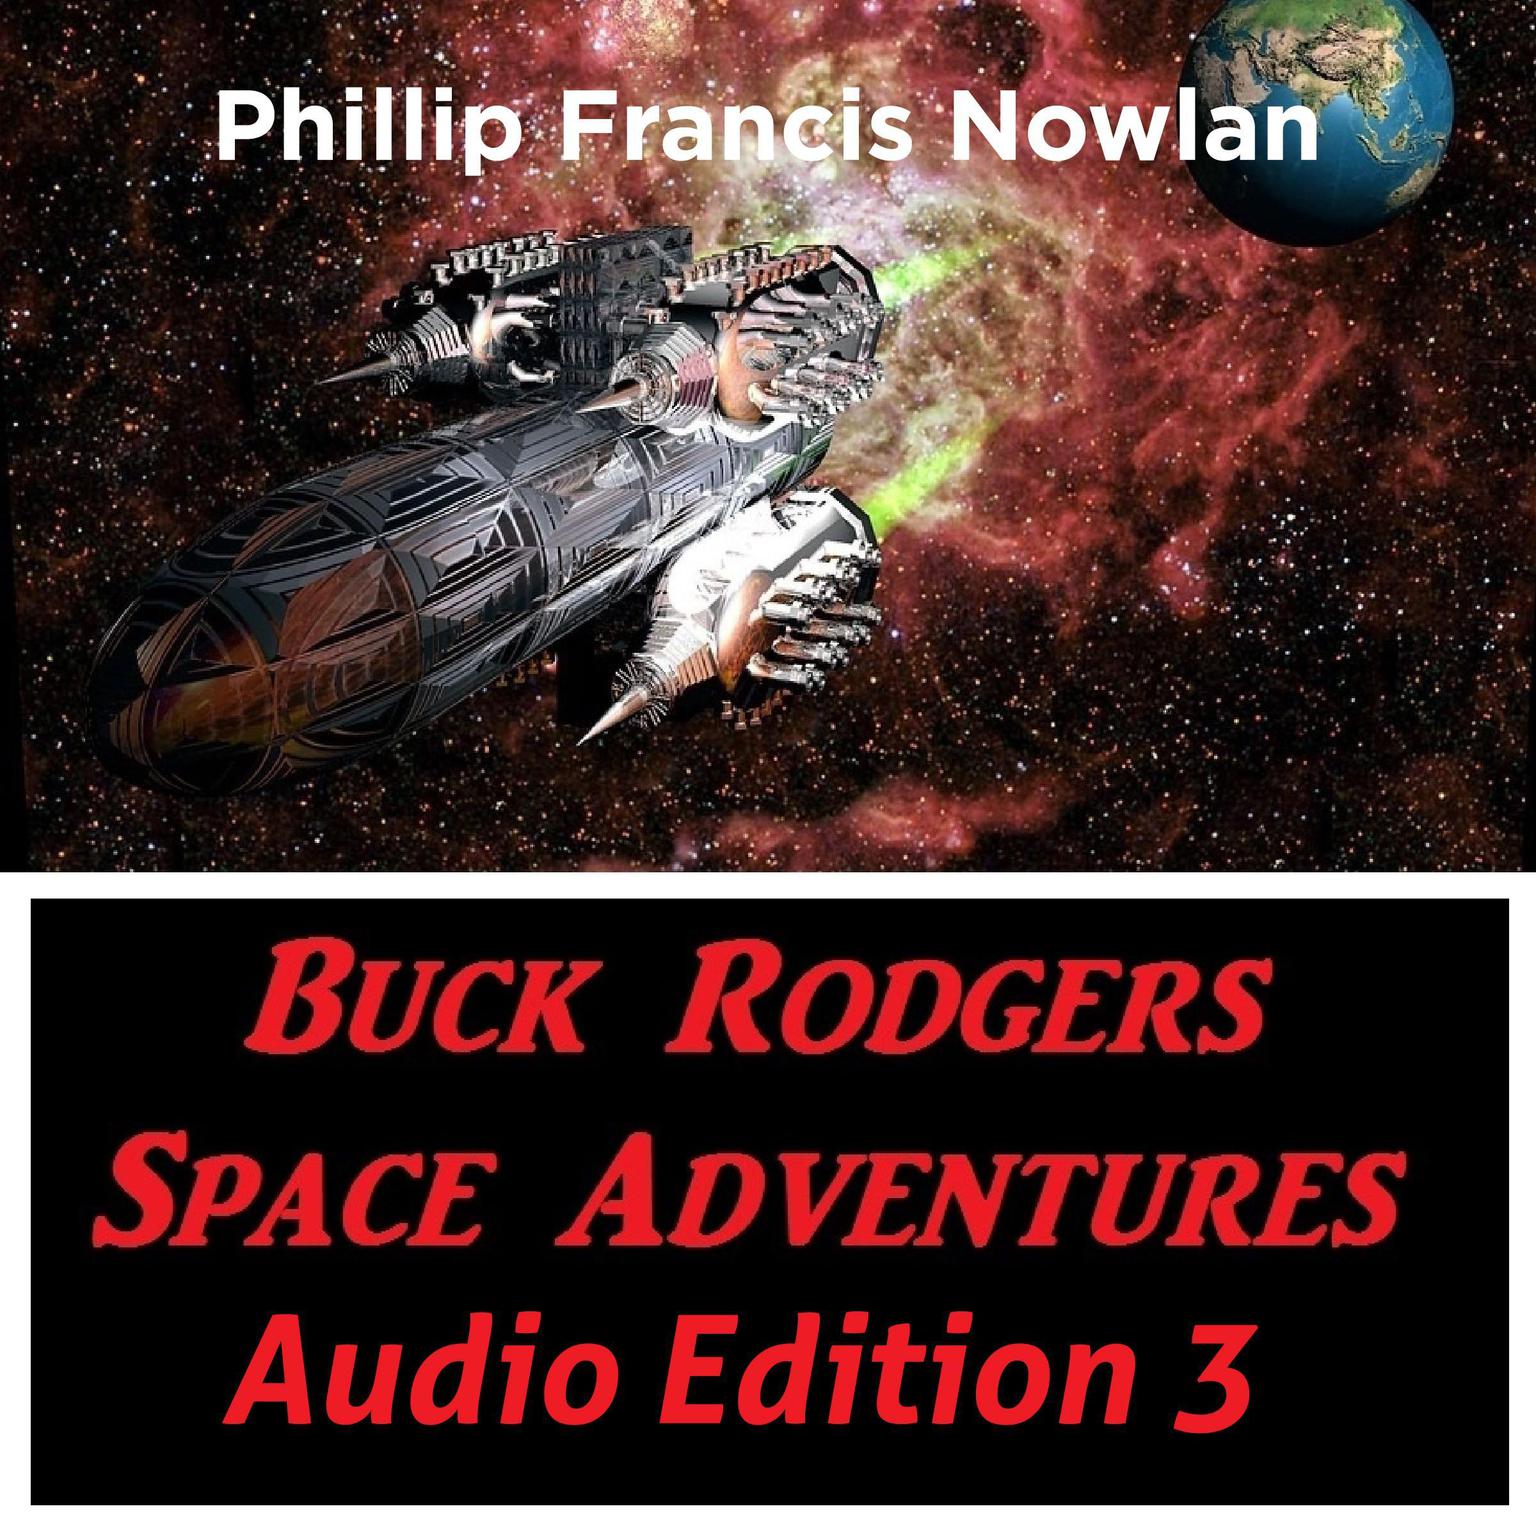 Buck Rodgers Space Adventures Audio Edition 03 Audiobook, by Phillip Francis Nowlan